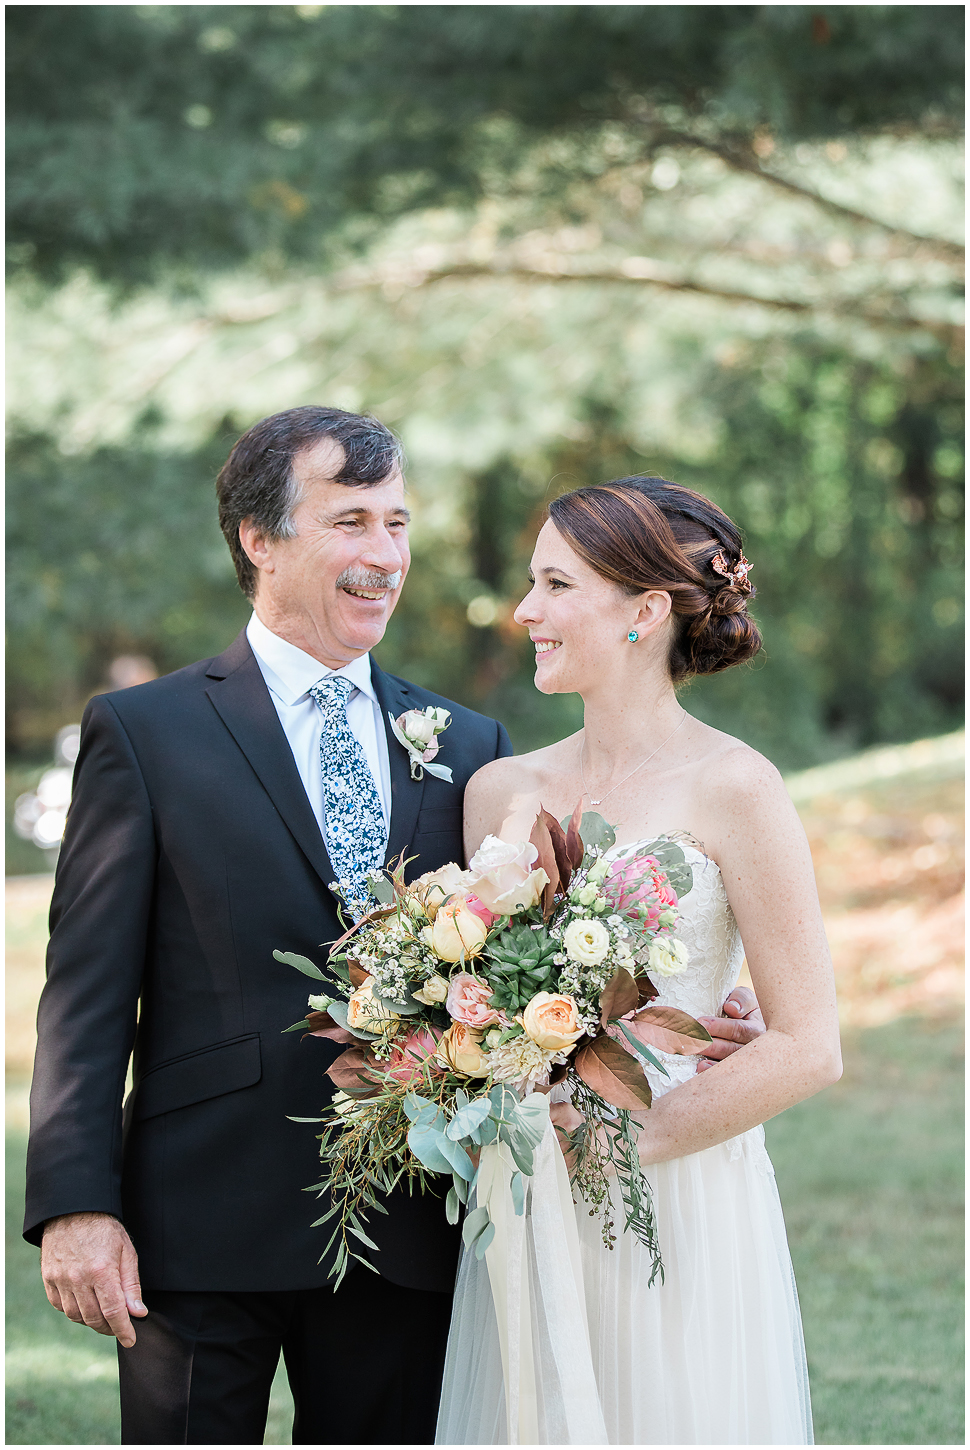 Candid portrait of a bride holding floral bouquet w/ copper leaves and her Dad. 